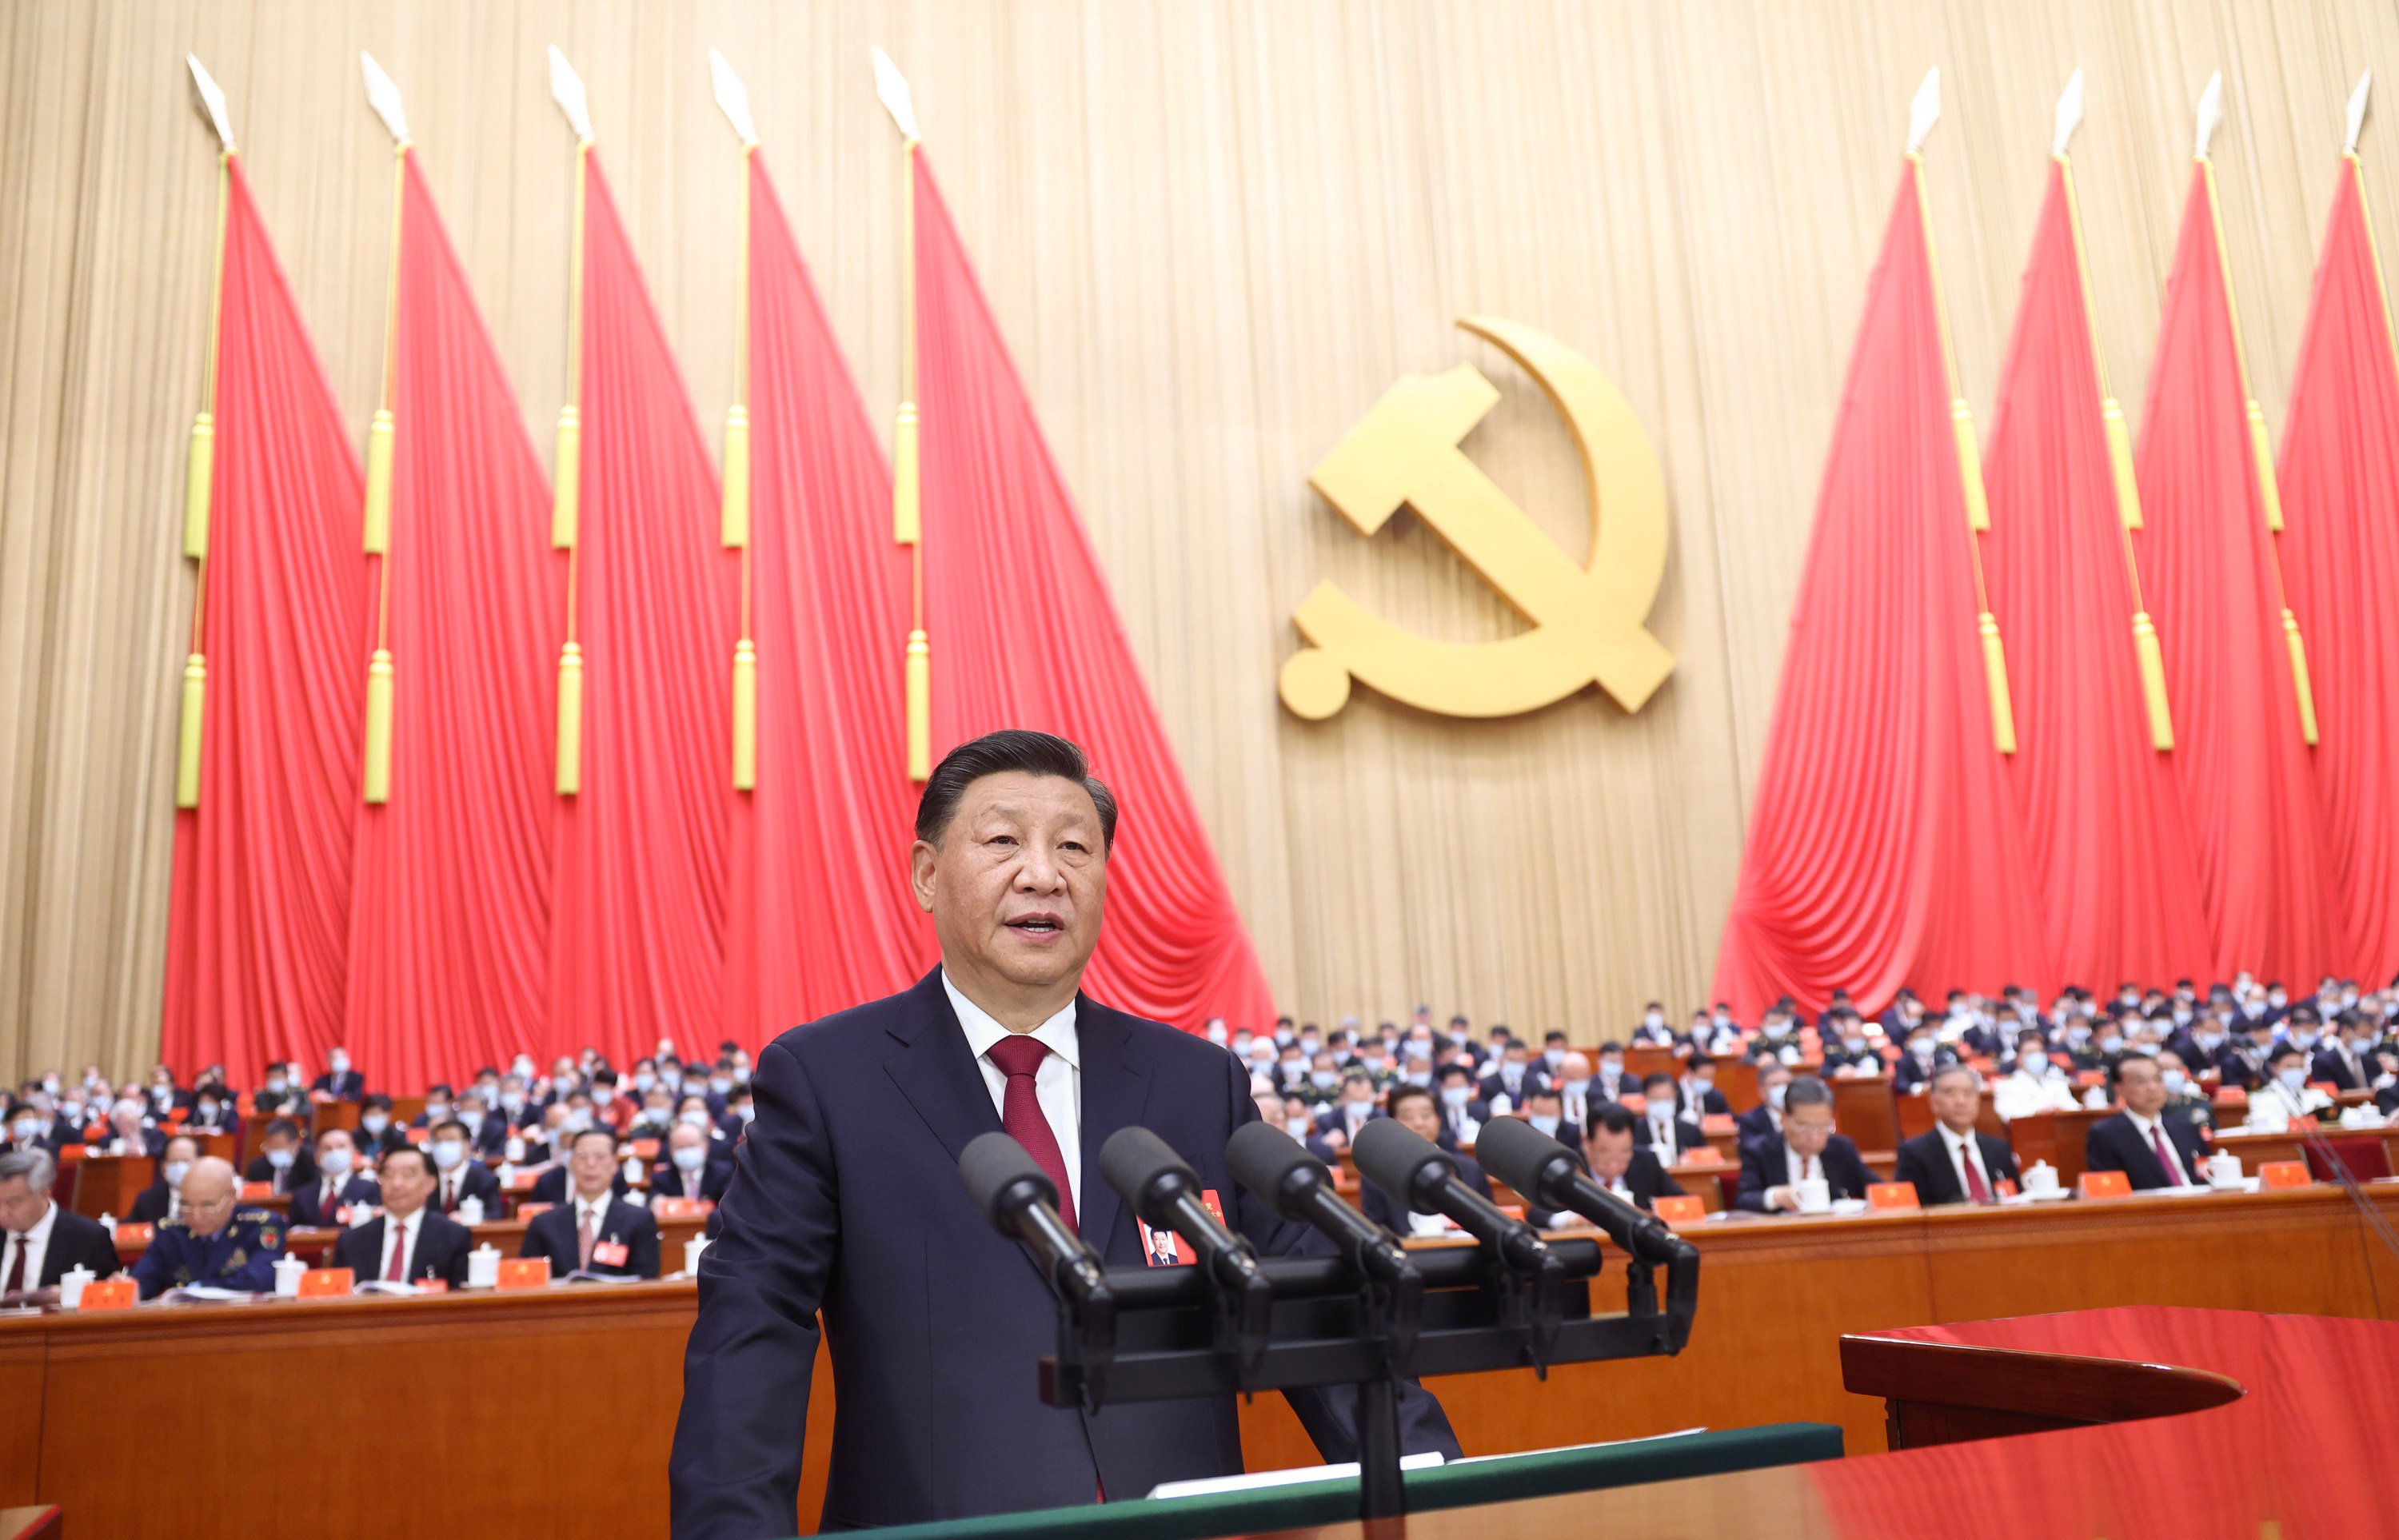 President Xi Jinping delivers a report to the 20th National Congress of the Communist Party of China at the Great Hall of the People in Beijing on October 16. Photo: Xinhua